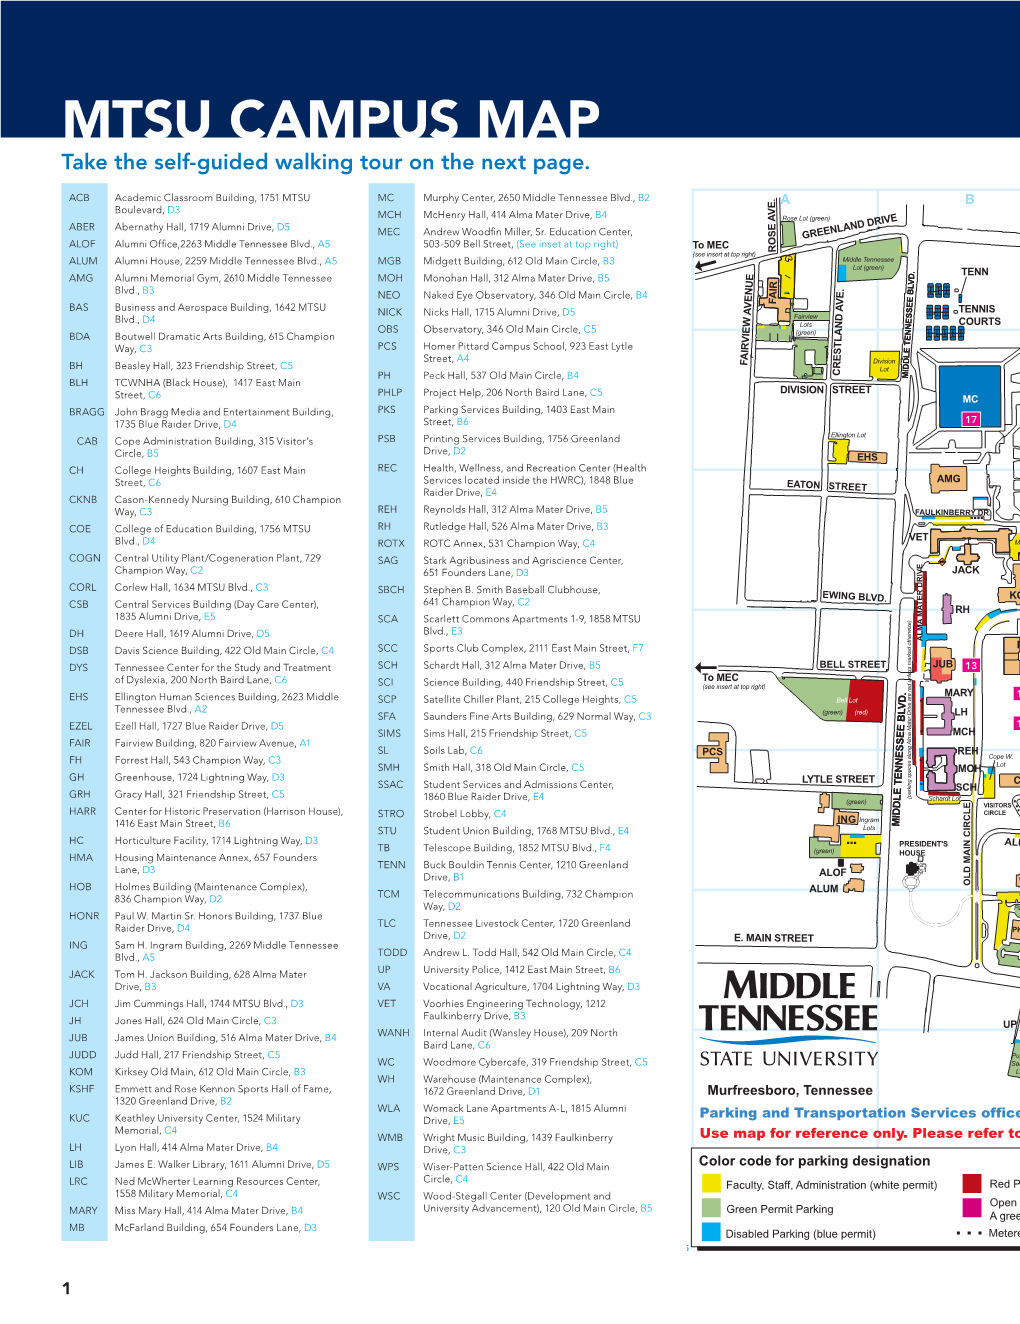 MTSU CAMPUS MAP Take the SelfGuided Walking Tour on the Next Page